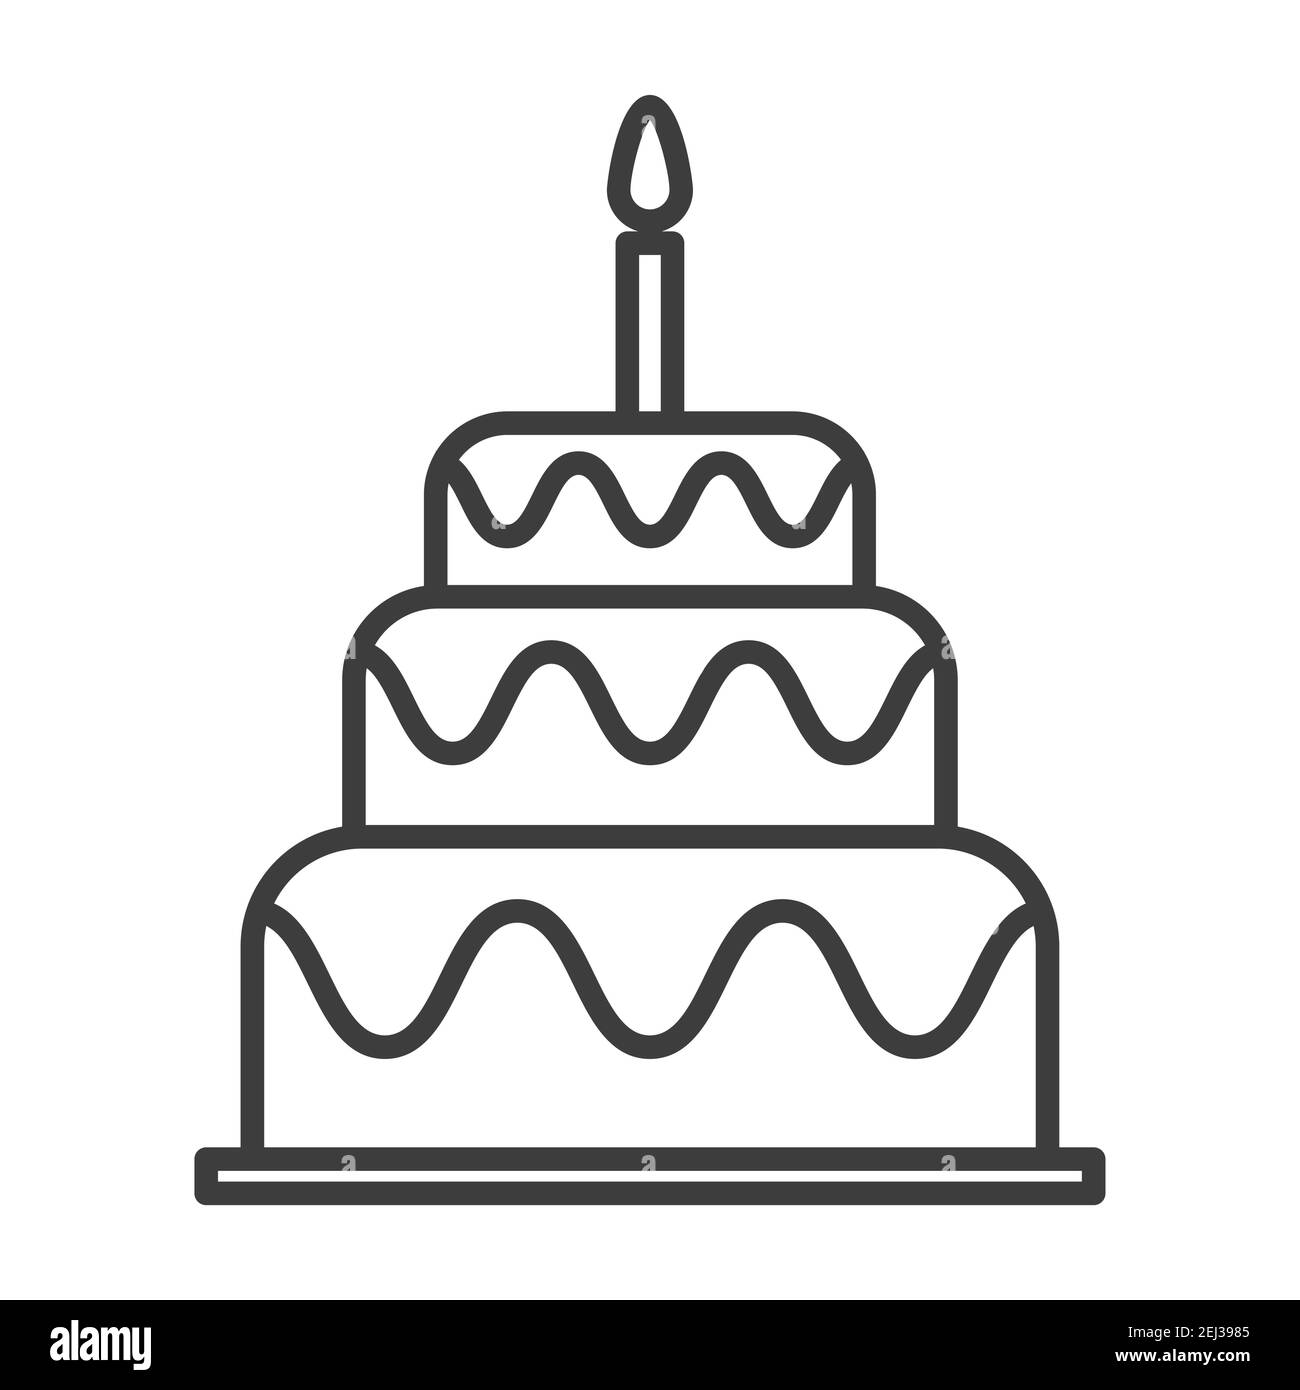 Birthday Cake. Simple food icon in trendy style isolated on white ...